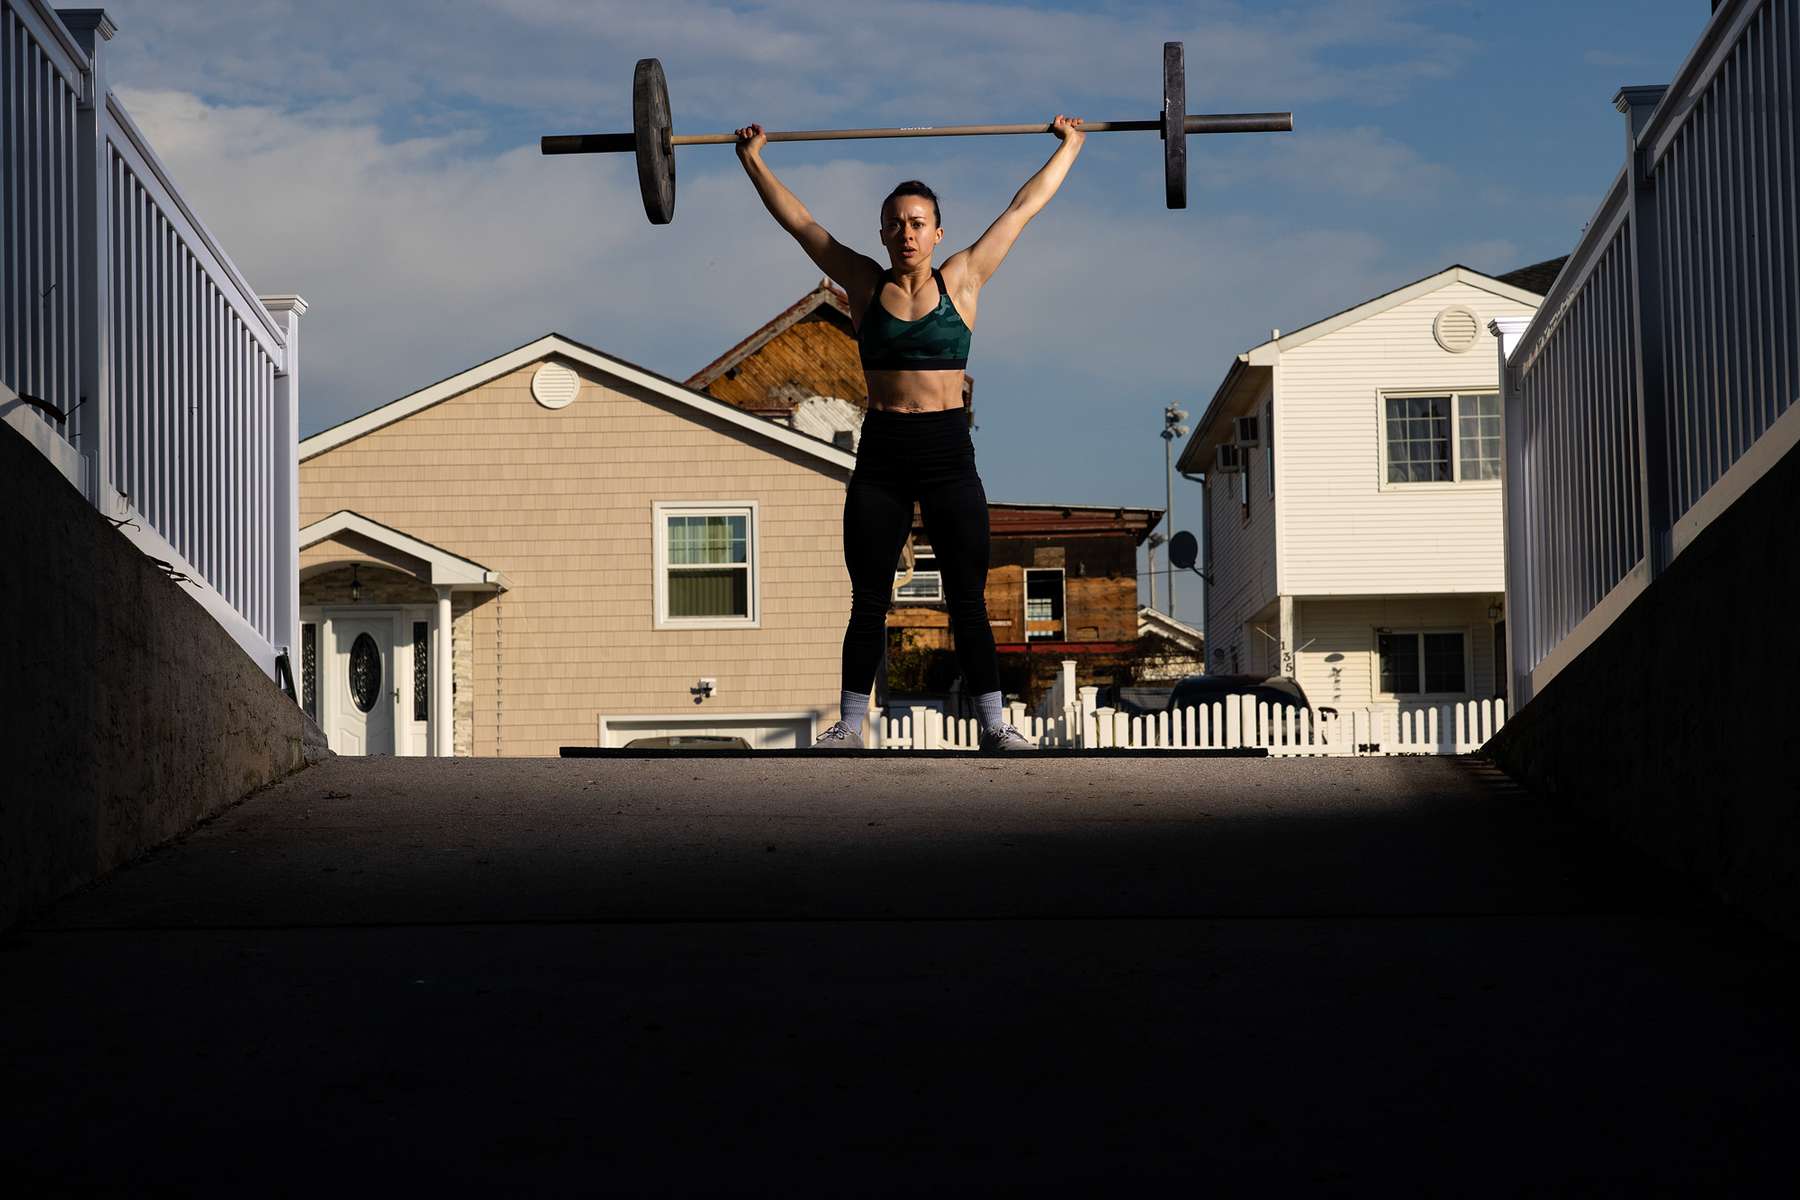 Nicole Guerrero exercises in her driveway with her virtual Fitness Trainer and Husband Dennis Guerrero on November 21st, 2020 in Long Beach, New York.  In March of 2014, Dennis Guerrero and his business partner opened a gym on Long Island. The pair shared a passion for fitness, a dream of creating a local community of like-minded people and a willingness to take a risk. Over the next six years, hundreds of members experienced and embraced a unique environment that fostered a palpable energy, helping athletes of all ages and abilities reach their potential.  The gym became a place to share achievements, work through losses and overcome illness. But like so many other businesses, it seemingly had no way of overcoming the financial impact and ongoing uncertainty of a global pandemic. With the arrival of Covid-19, the gym shut its doors back in March, with no idea when it would reopen. The owners, though, were far from done. They lent out every piece of equipment they owned to the gym’s members, continued to pay their staff and worked to set up outdoor classes in hopes of keeping their membership active and healthy. As the shutdown stretched on, it became clear that the physical gym was closed for good.  They have since reinvented themselves and are now called Life Outside the Box.  Their business model has changed drastically, and all their workouts have gone virtual.  The workouts are conducted by a small group of fitness trainers led by Guerrero.  The members pay a monthly fee and can take live Zoom fitness classes.  They are coached by the virtual trainers in real time.  More and more people have reconstructed their garages, spare rooms, backyards, and basements into home gyms since the COVID-19 pandemic hit the United States.